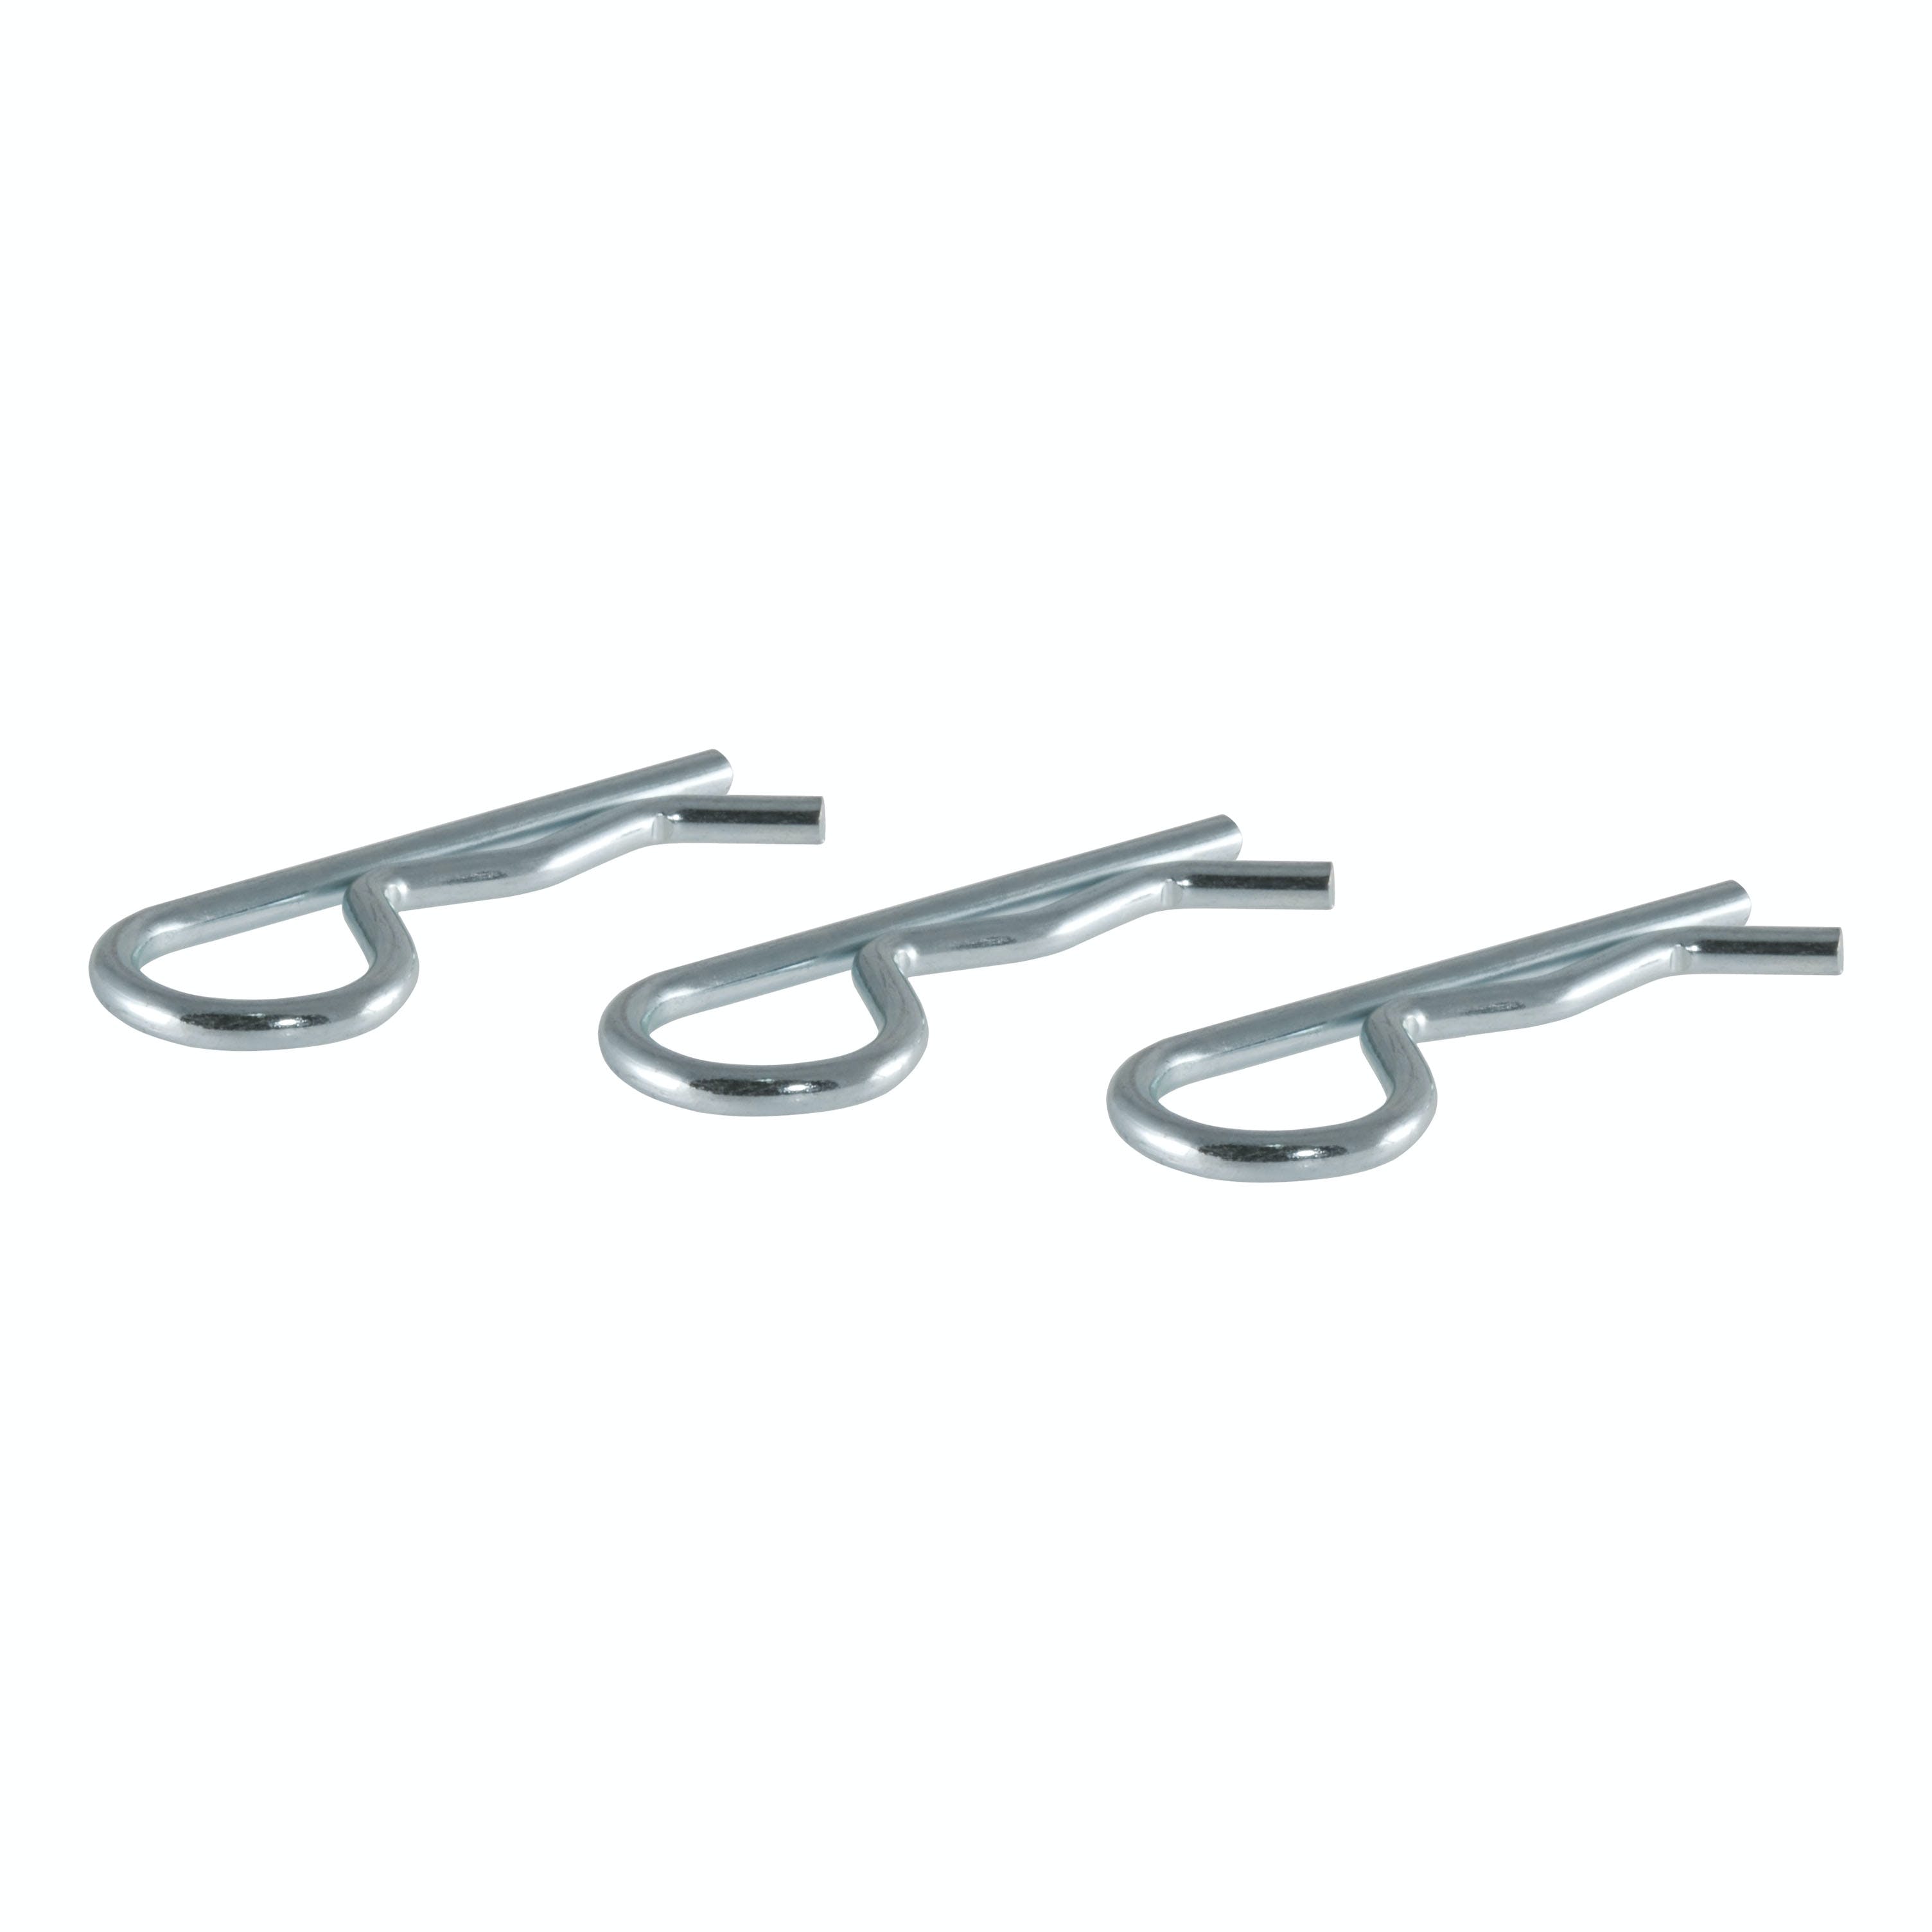 CURT 21602 Hitch Clips (Fits 1/2 or 5/8 Pin, Zinc, 3-Pack)